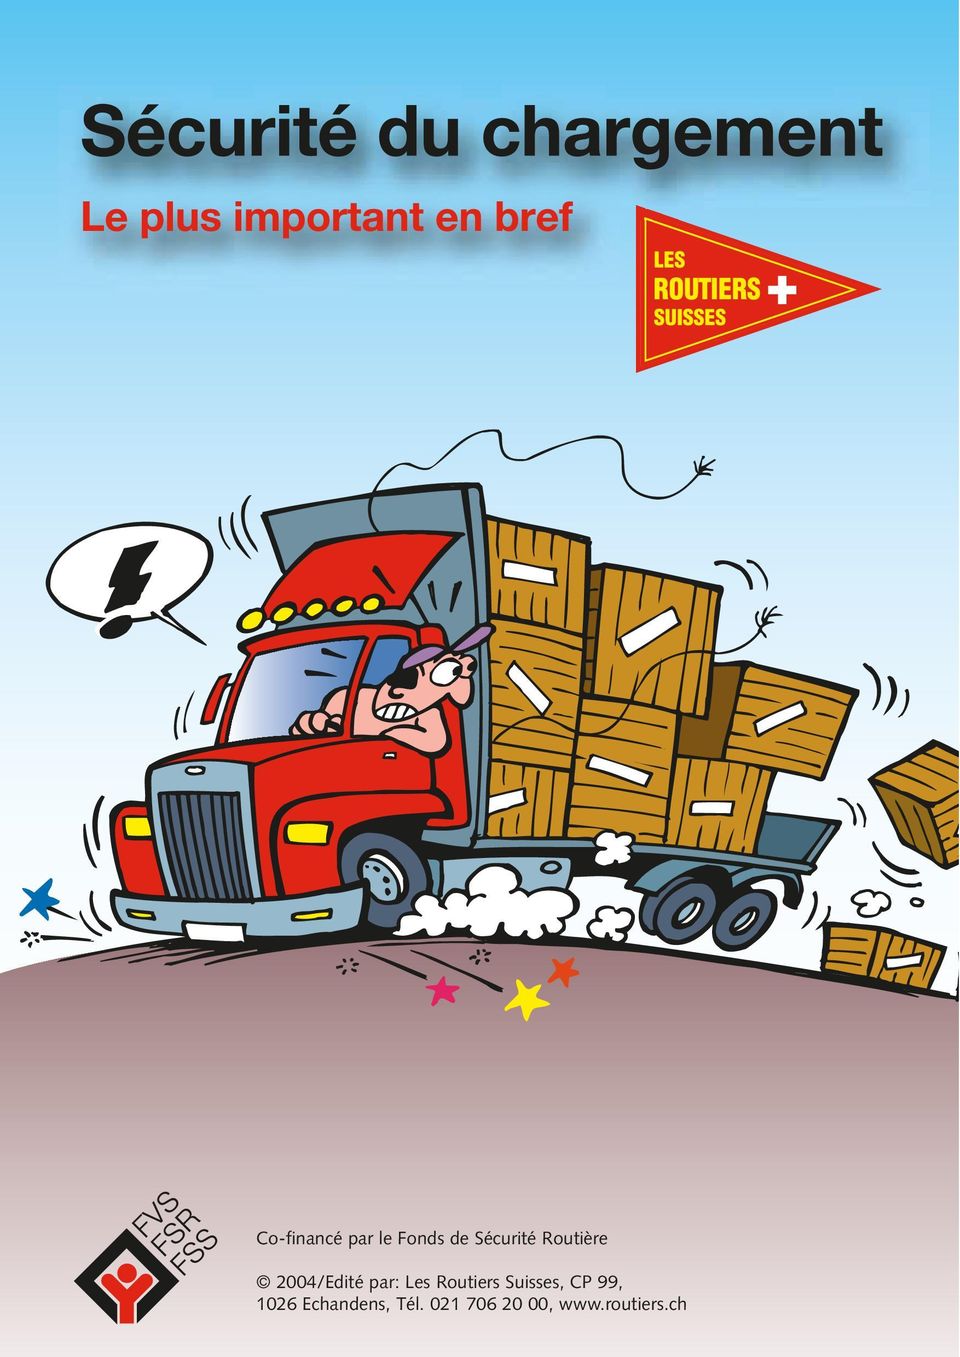 Routiers Suisses, CP 99, 1026